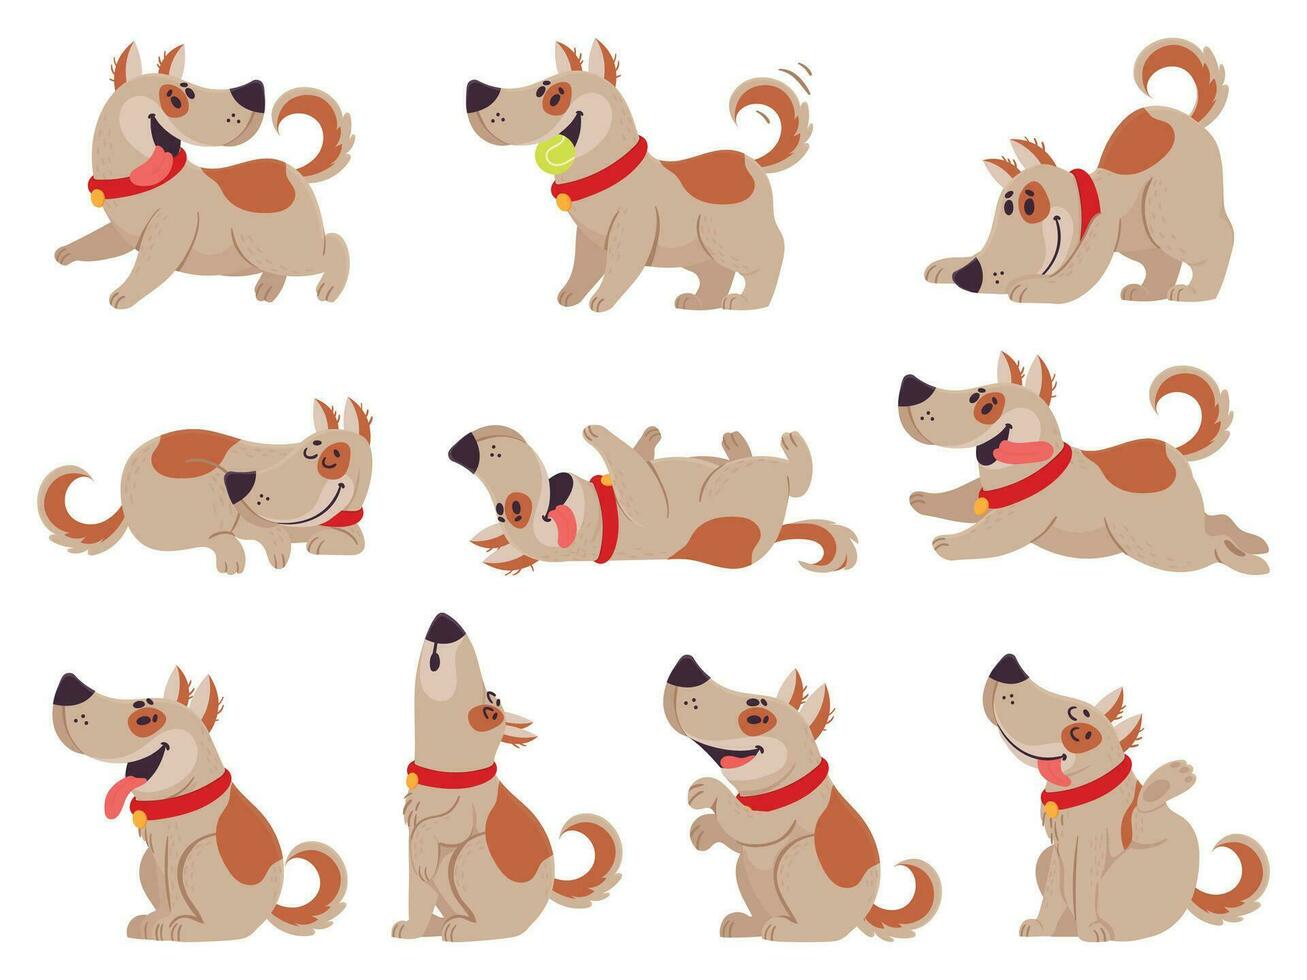 Cartoon dog. Cute dogs in daily routine eating, jumping wiggle and sleeping, running and barking, different poses pet activity vector set.